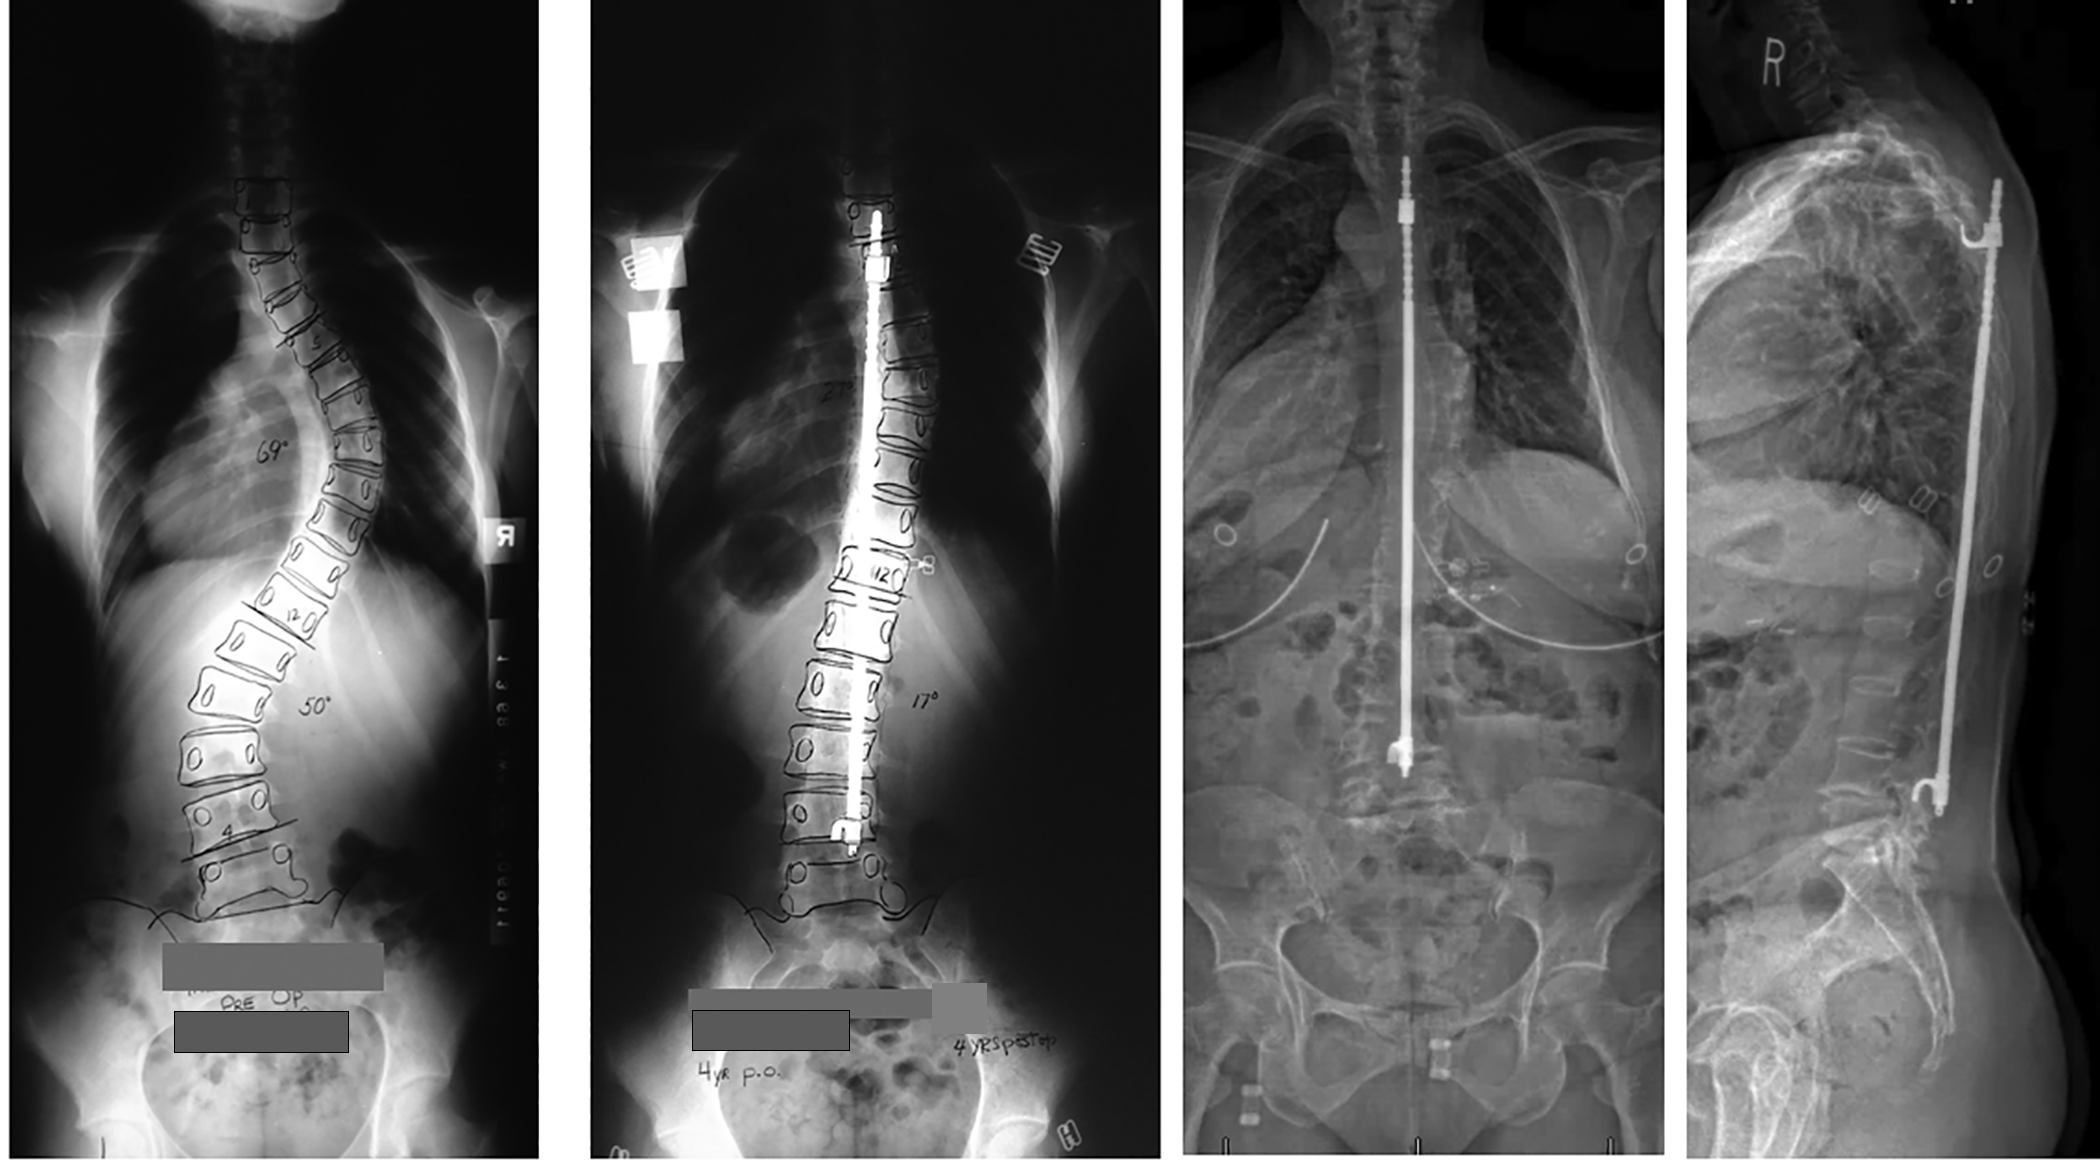 A series of radiographs of a patient with instrumentation and fusion from T4 to L4.